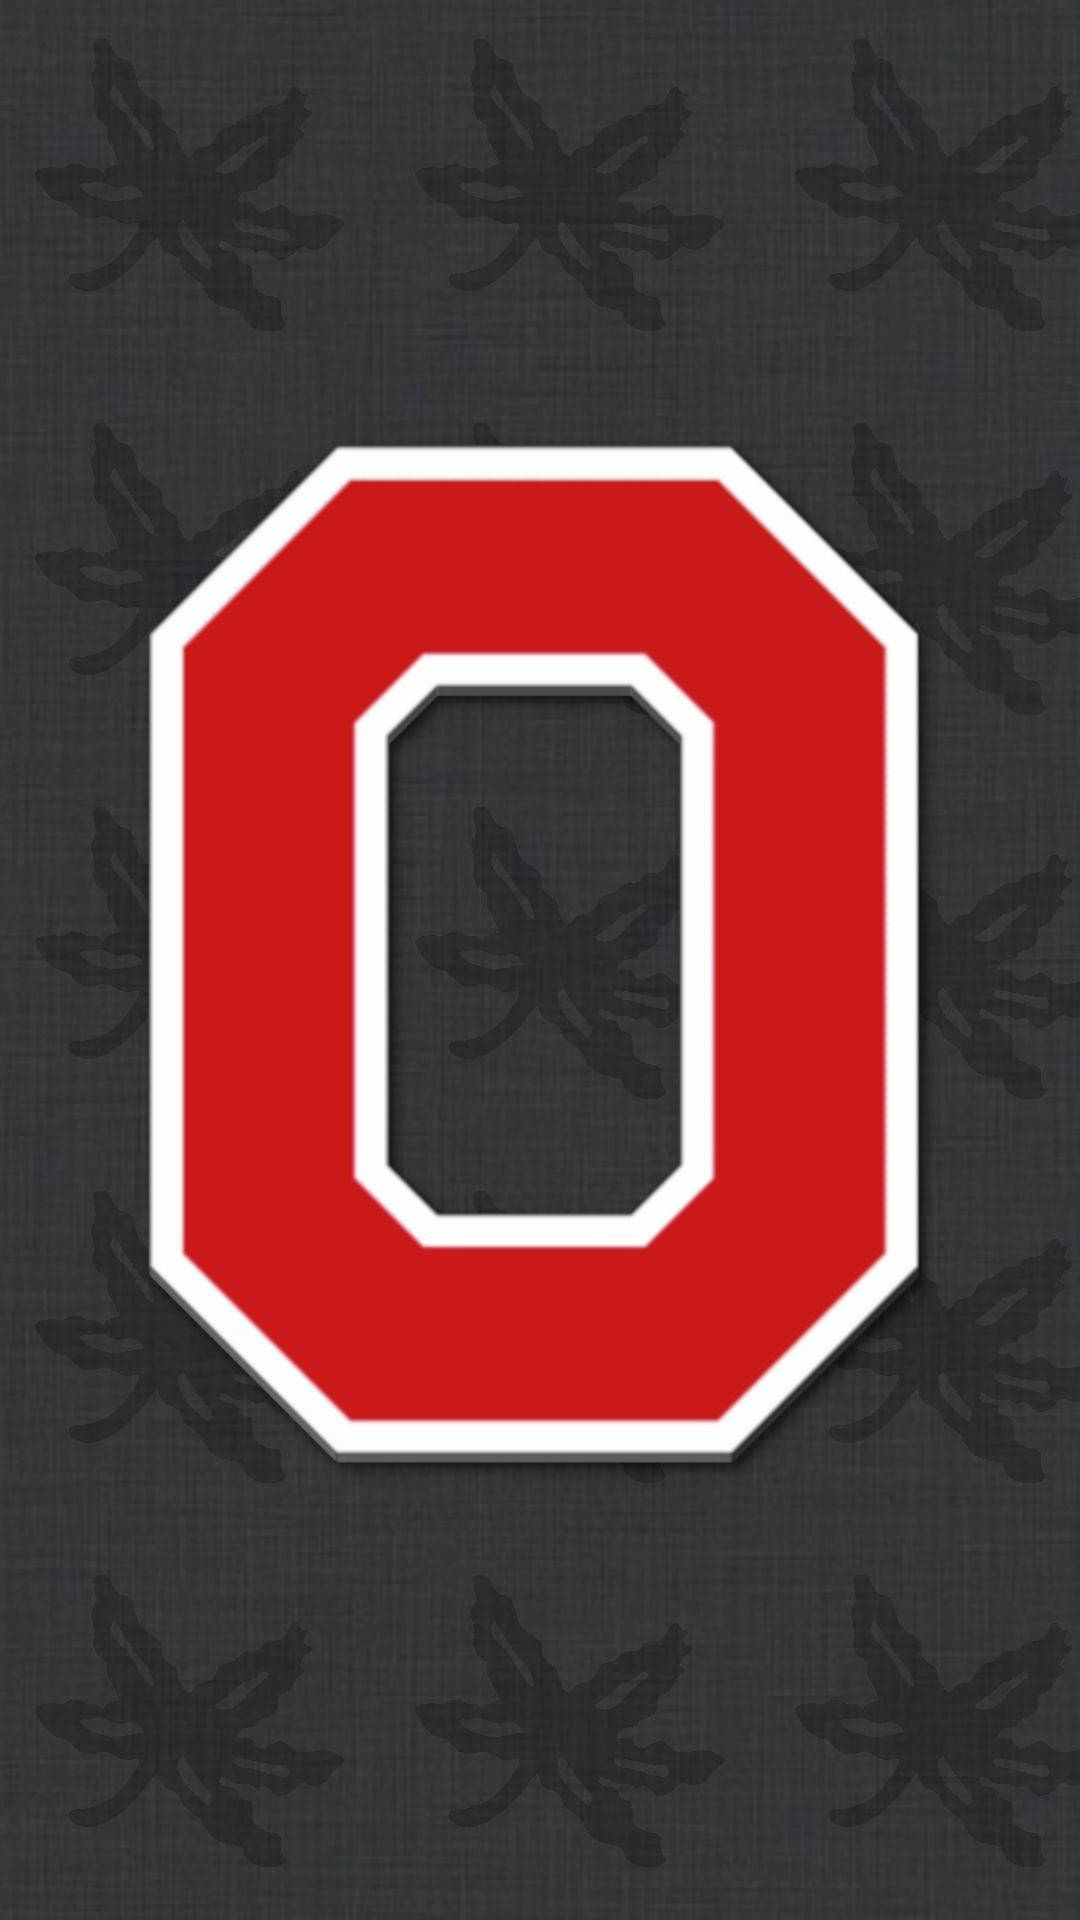 Ohio State Buckeyes Letter Collage Background